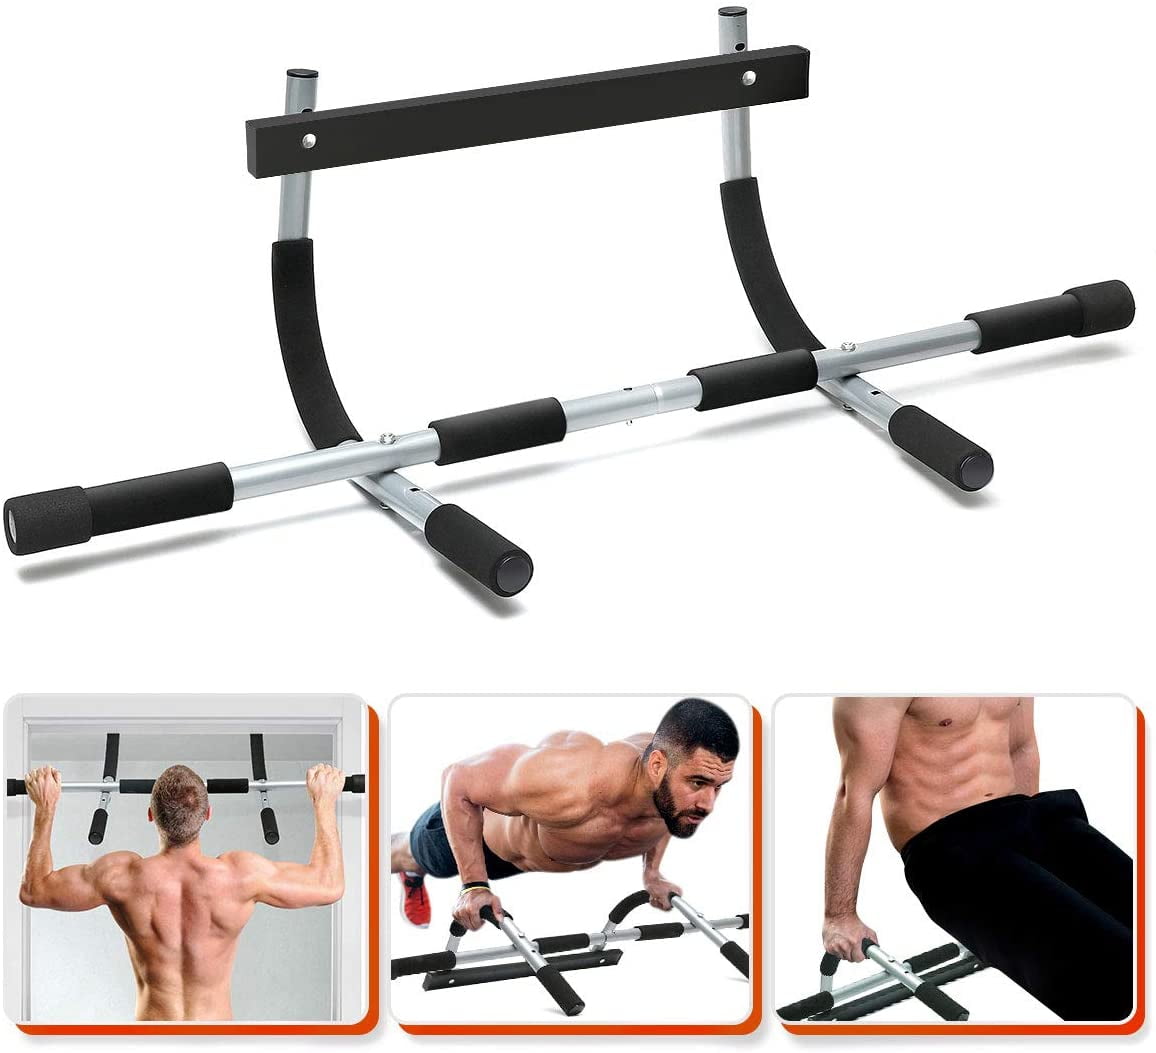 Doorway Pull Up and Chin Up Bar Upper Body Workout Bar for Home Gym Exercise Fit 